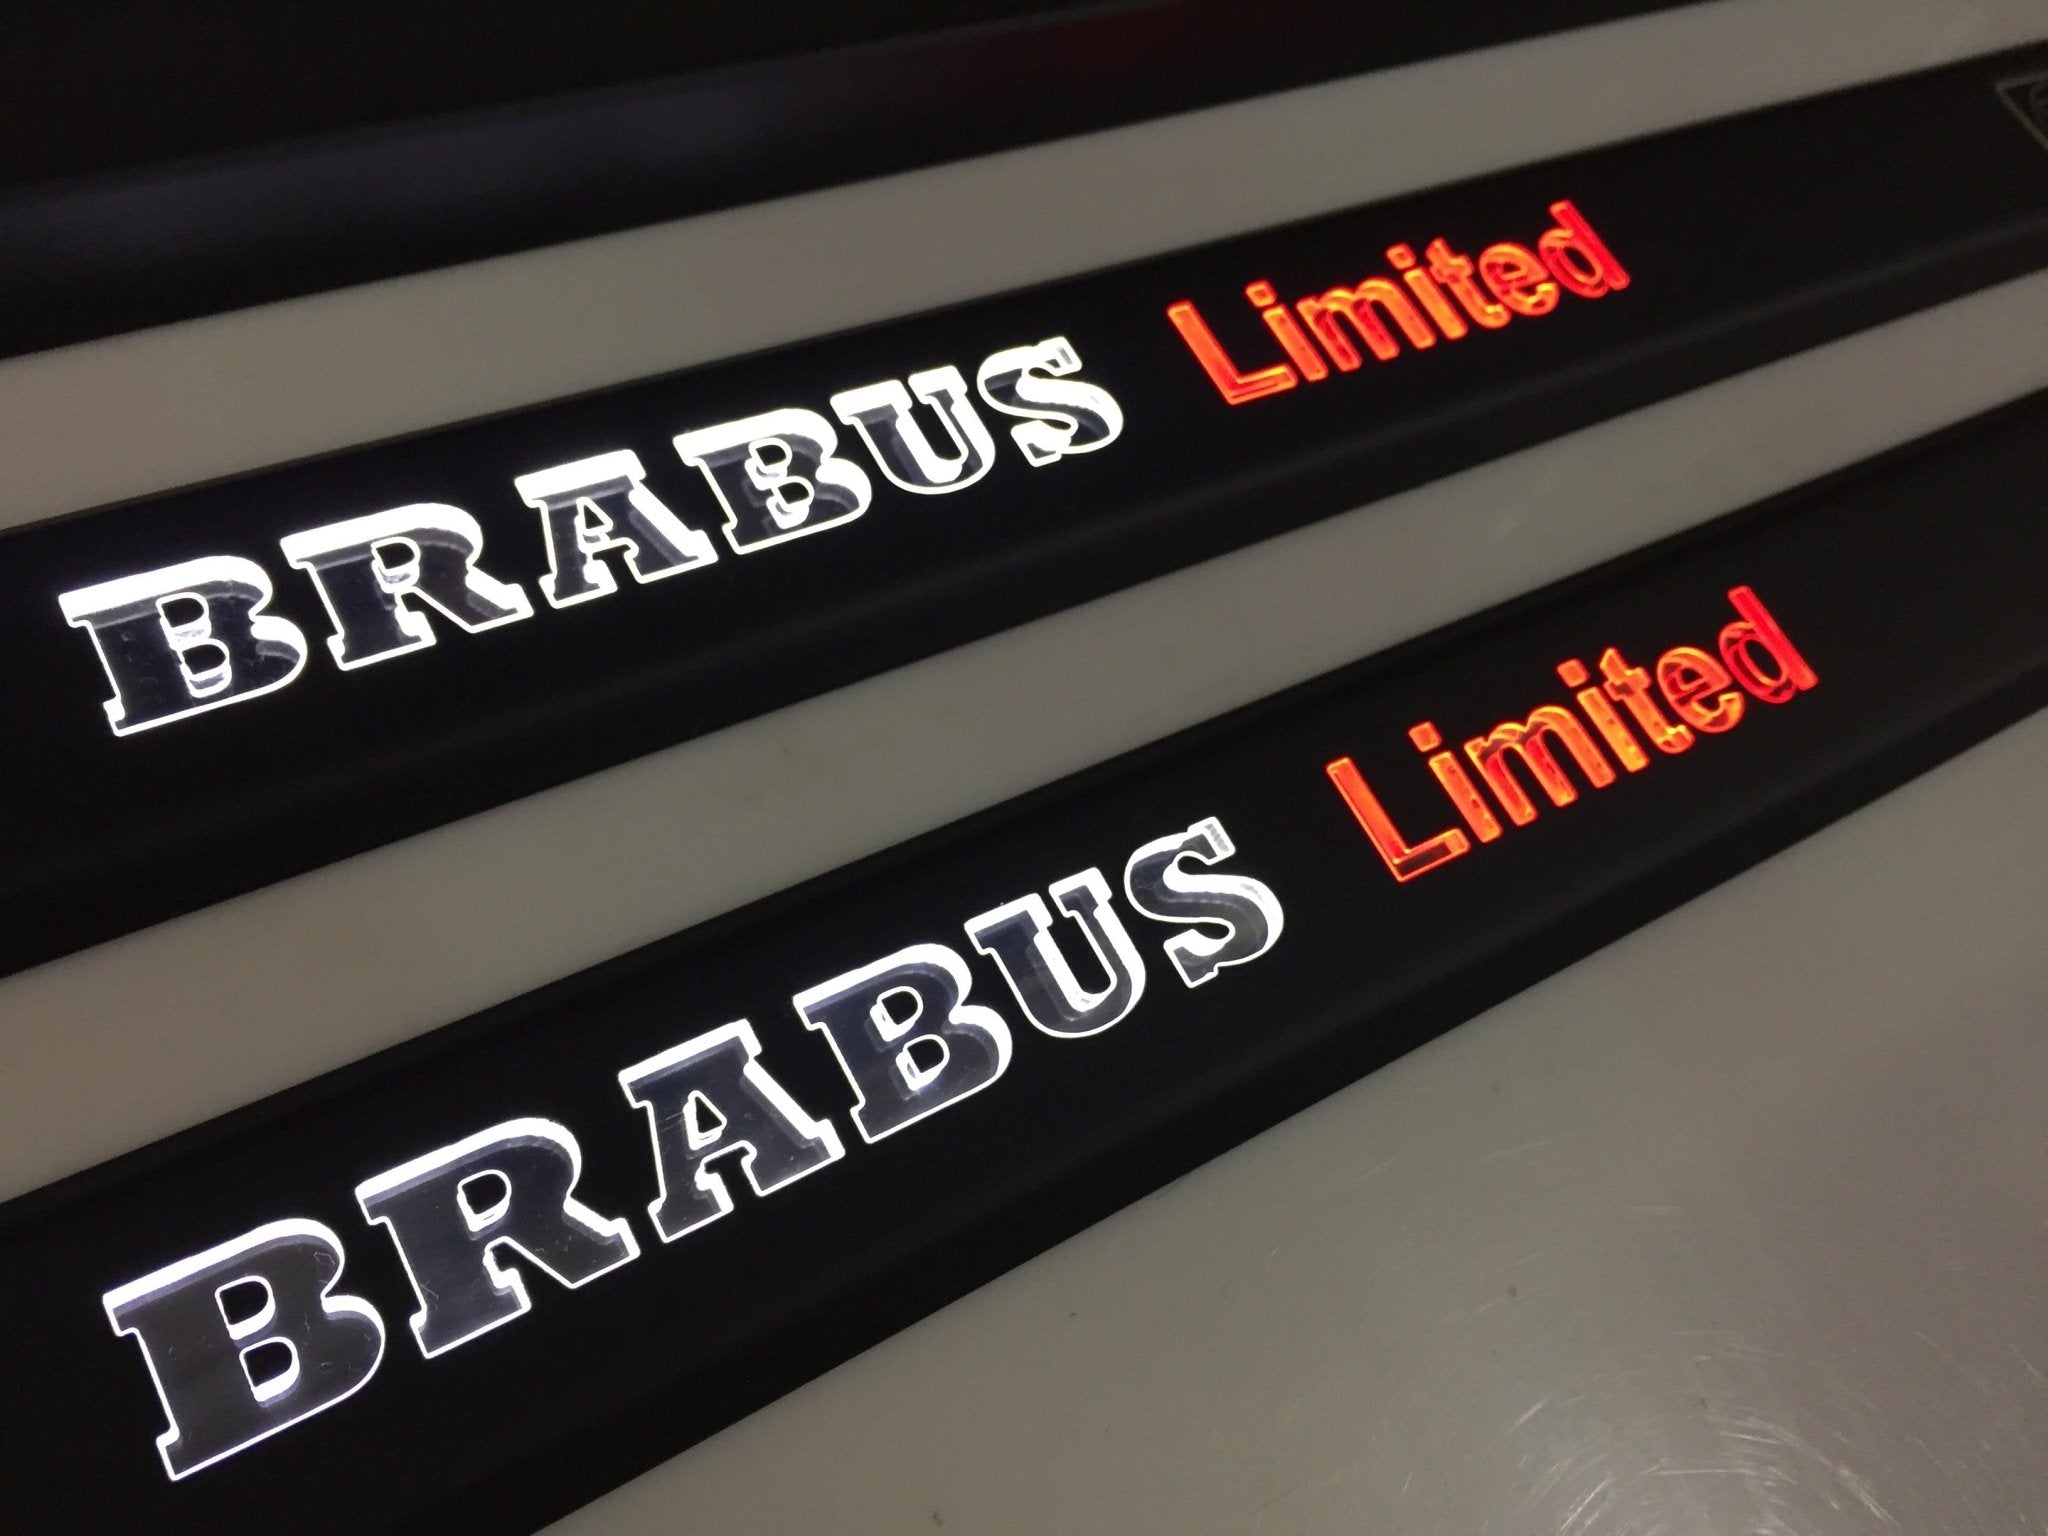 Brabus Limited LED Illuminated Door Sills 4 or 5 pcs for Mercedes-Benz G-Class W463